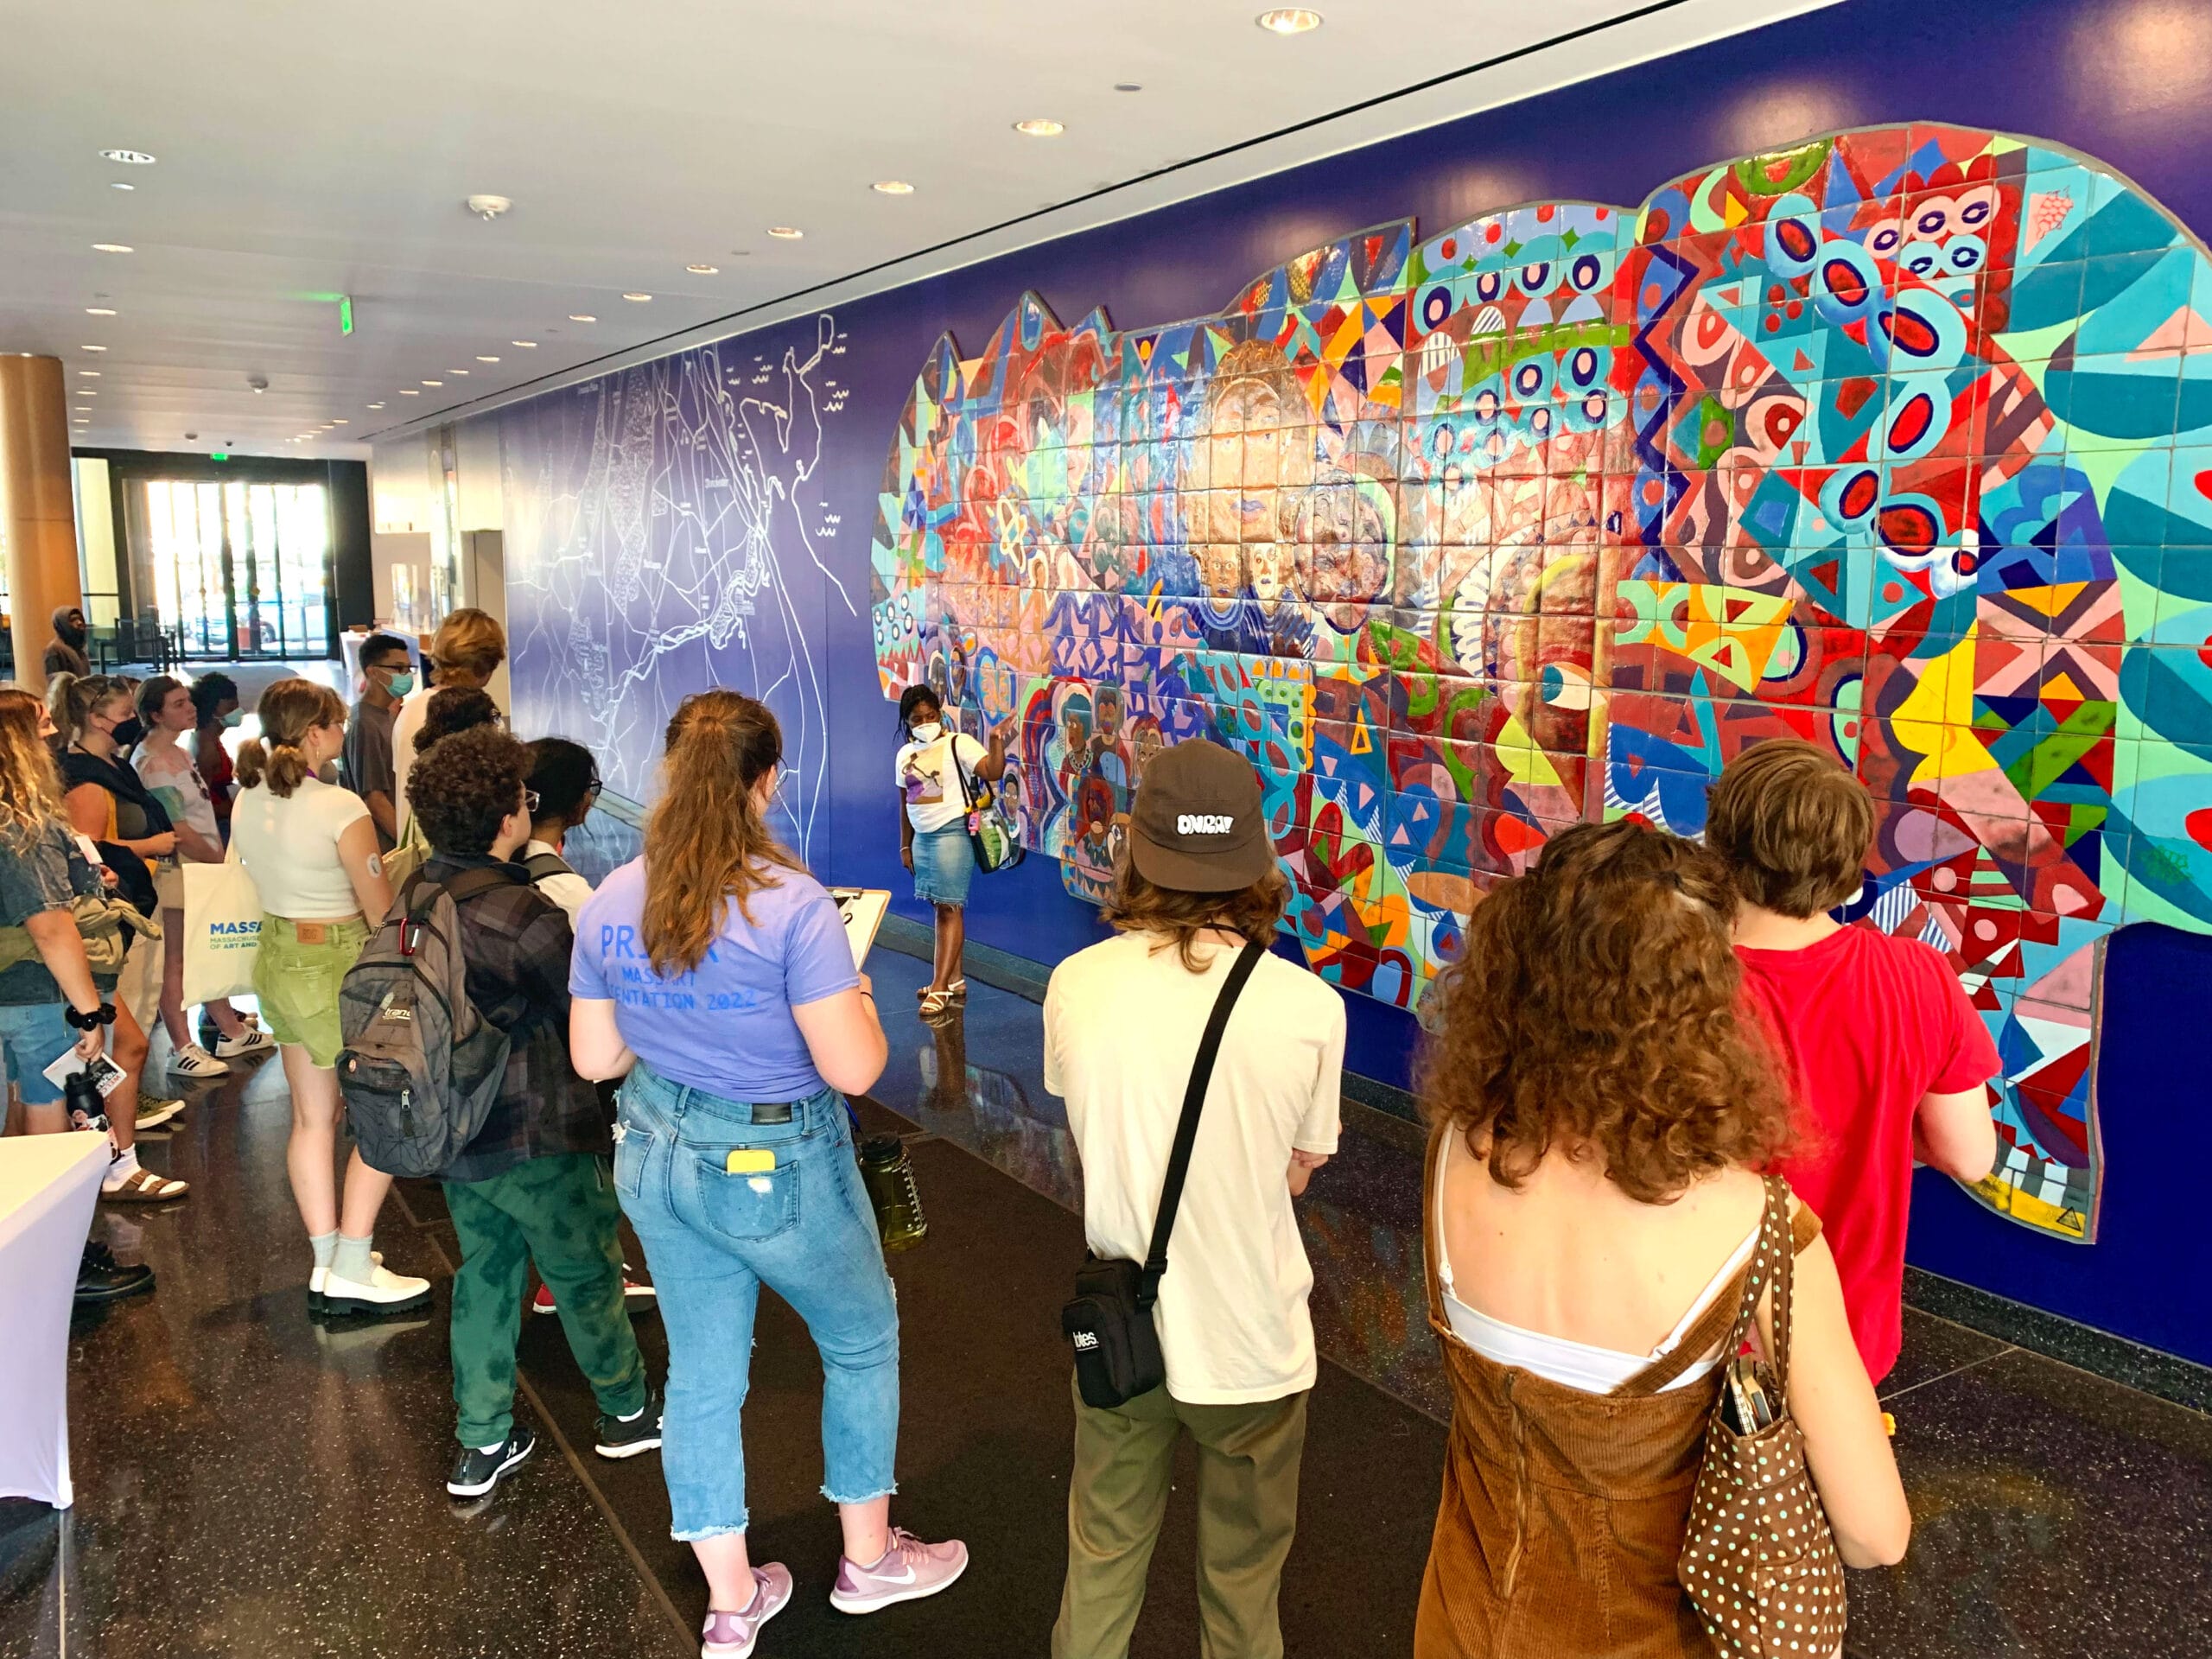 Students stand in front of a mural called "Roxbury Rhapsody."